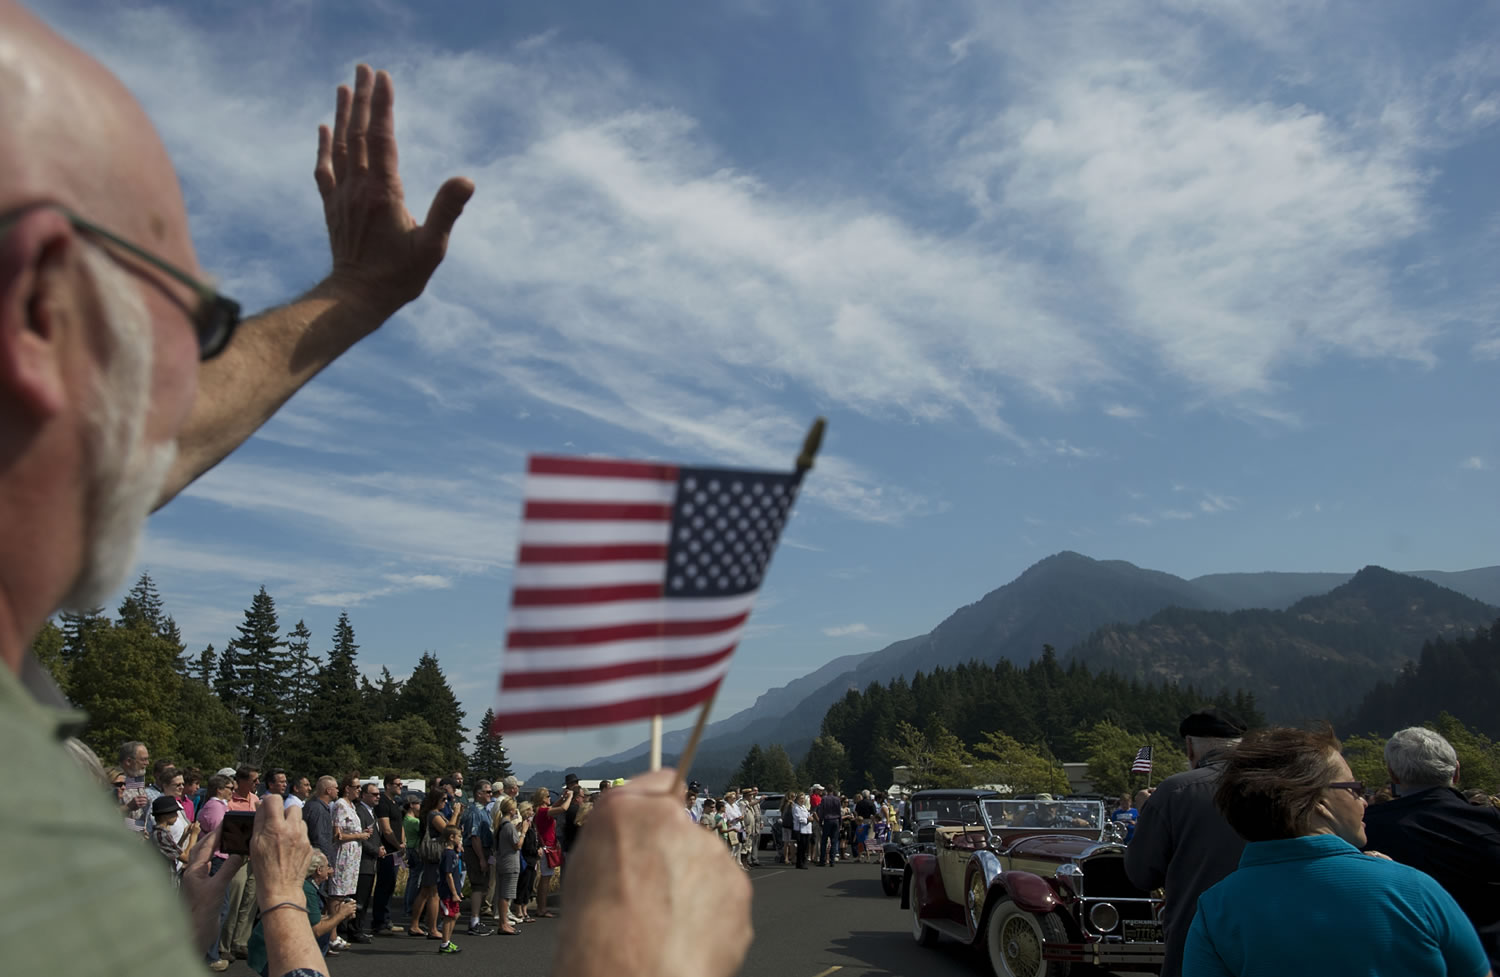 John Adams of Ocean Park, Ore., waves at a passing parade of 1930s-era cars carrying federal officials, politicians, tribal leaders and visitors to mark the 75th anniversary of the dedication of the Bonneville Dam on the Columbia River.